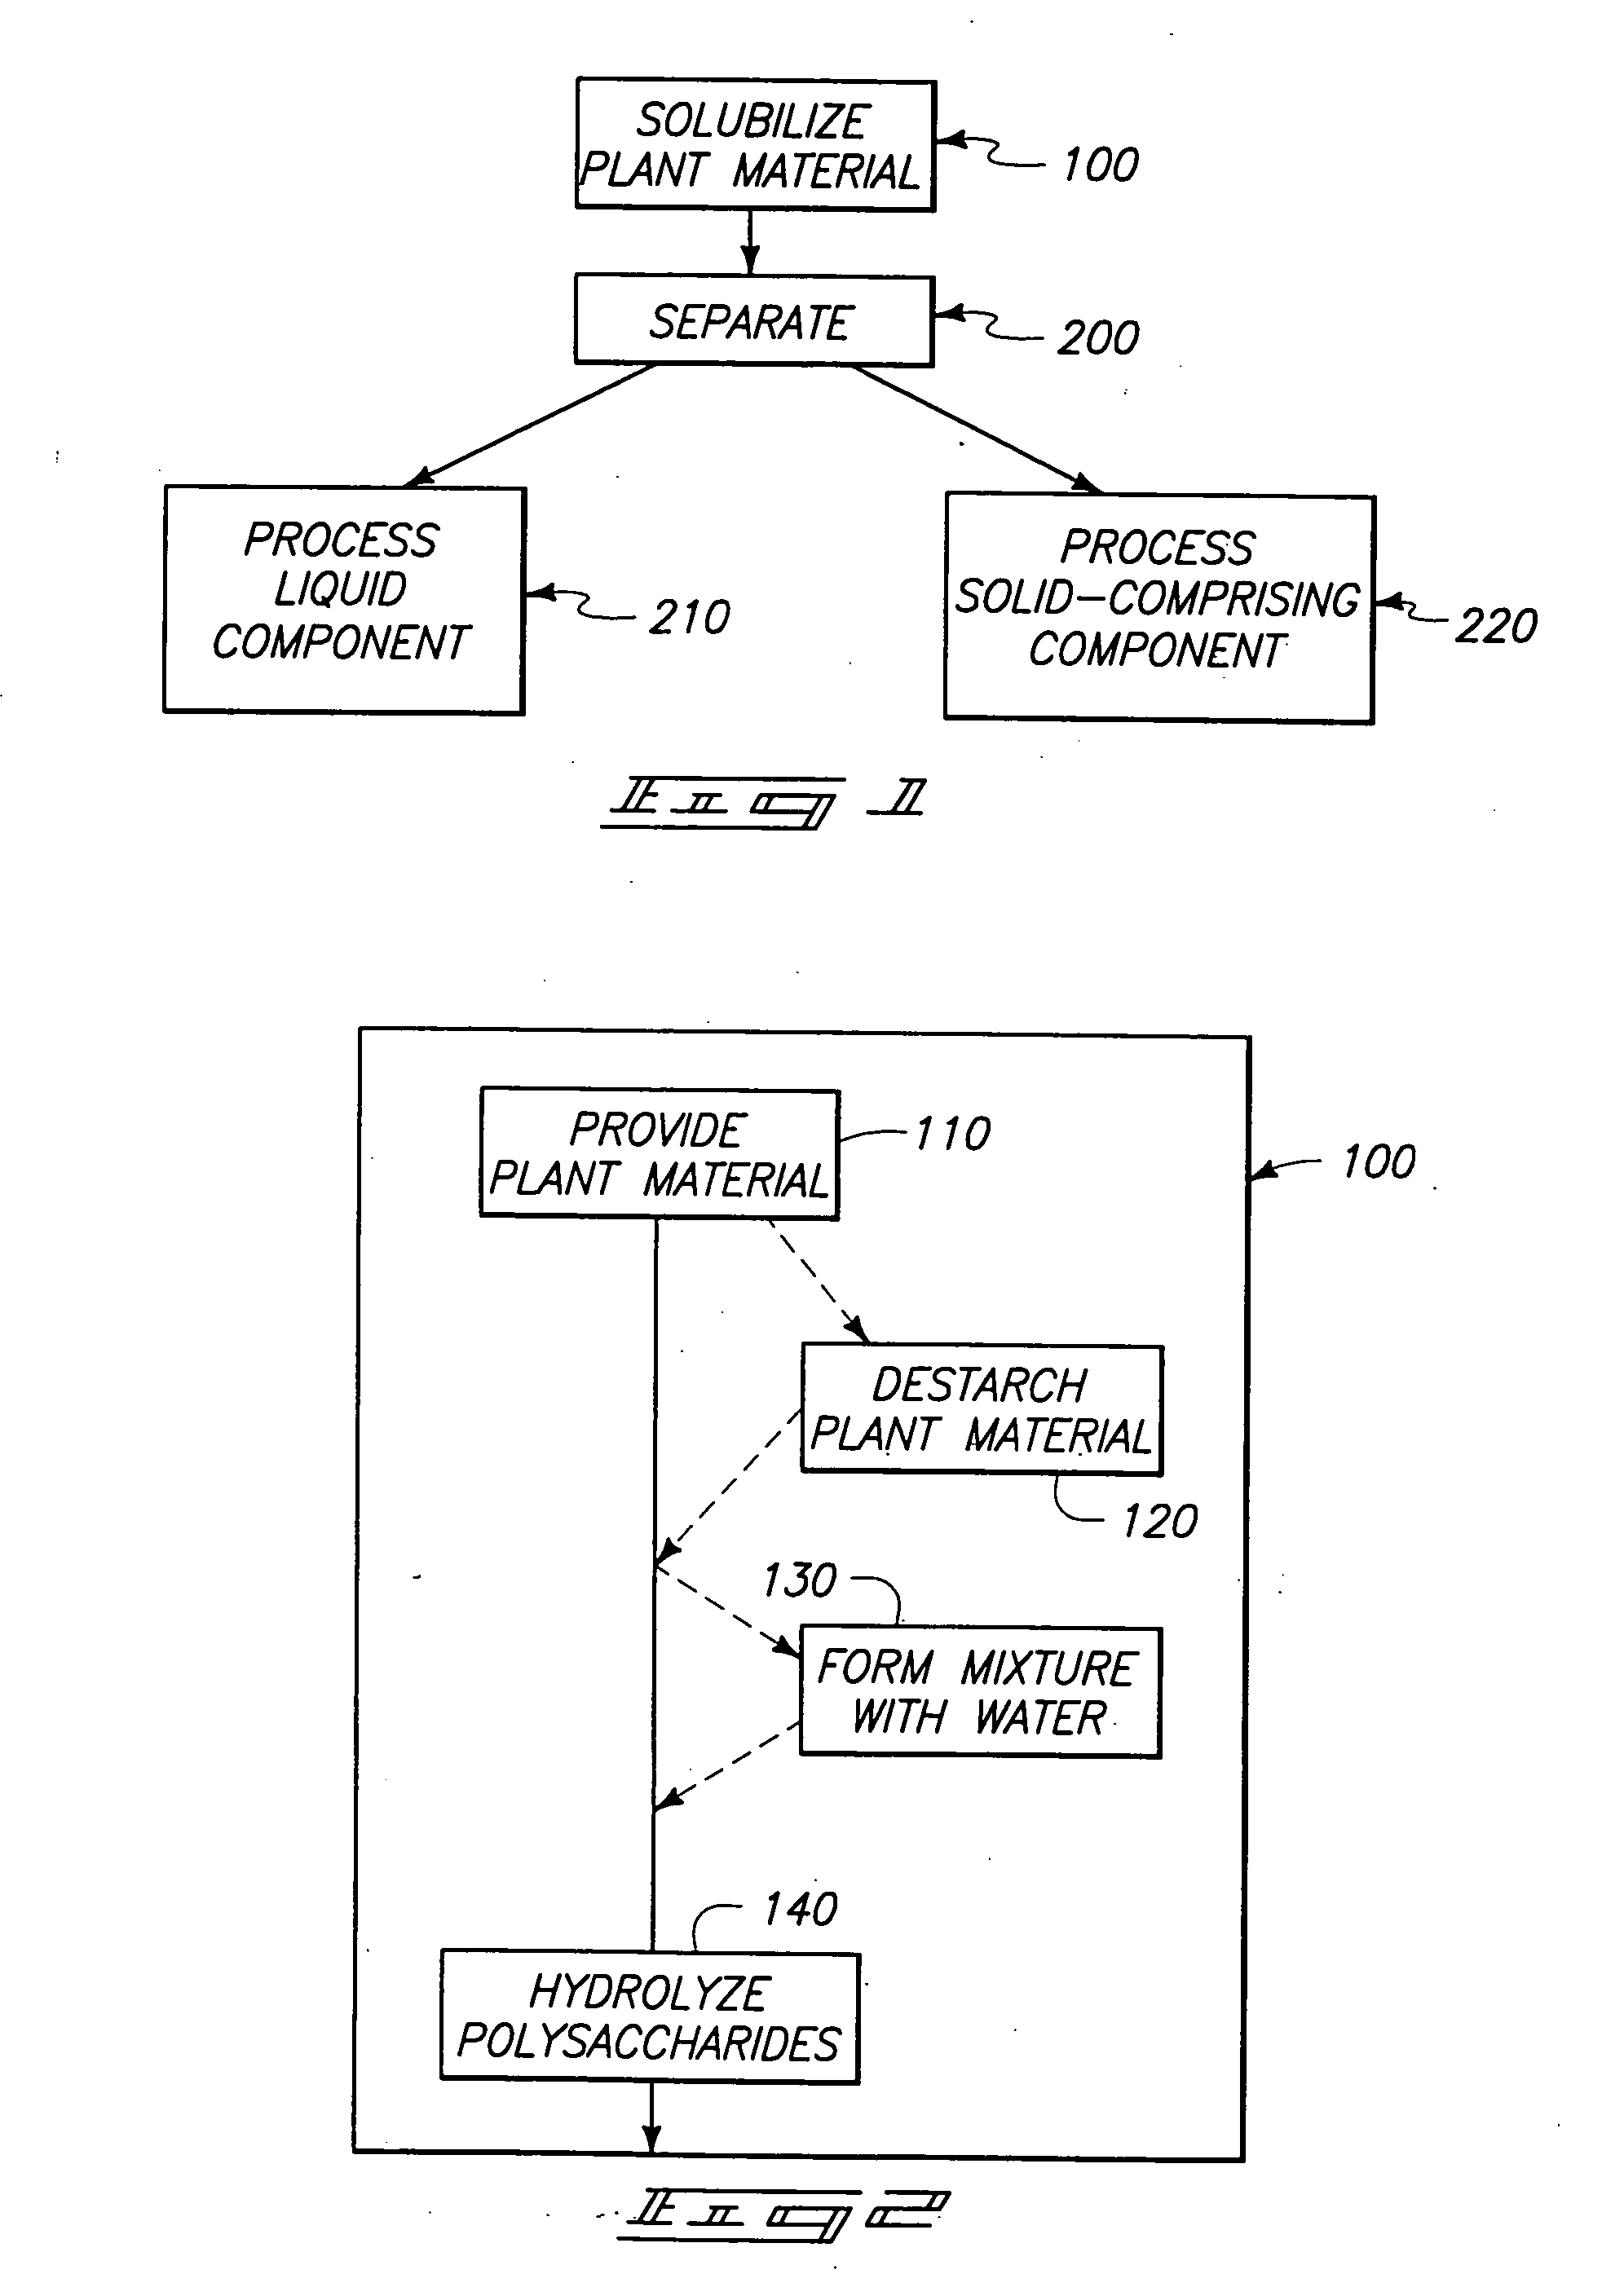 Methods of producing compounds from plant material